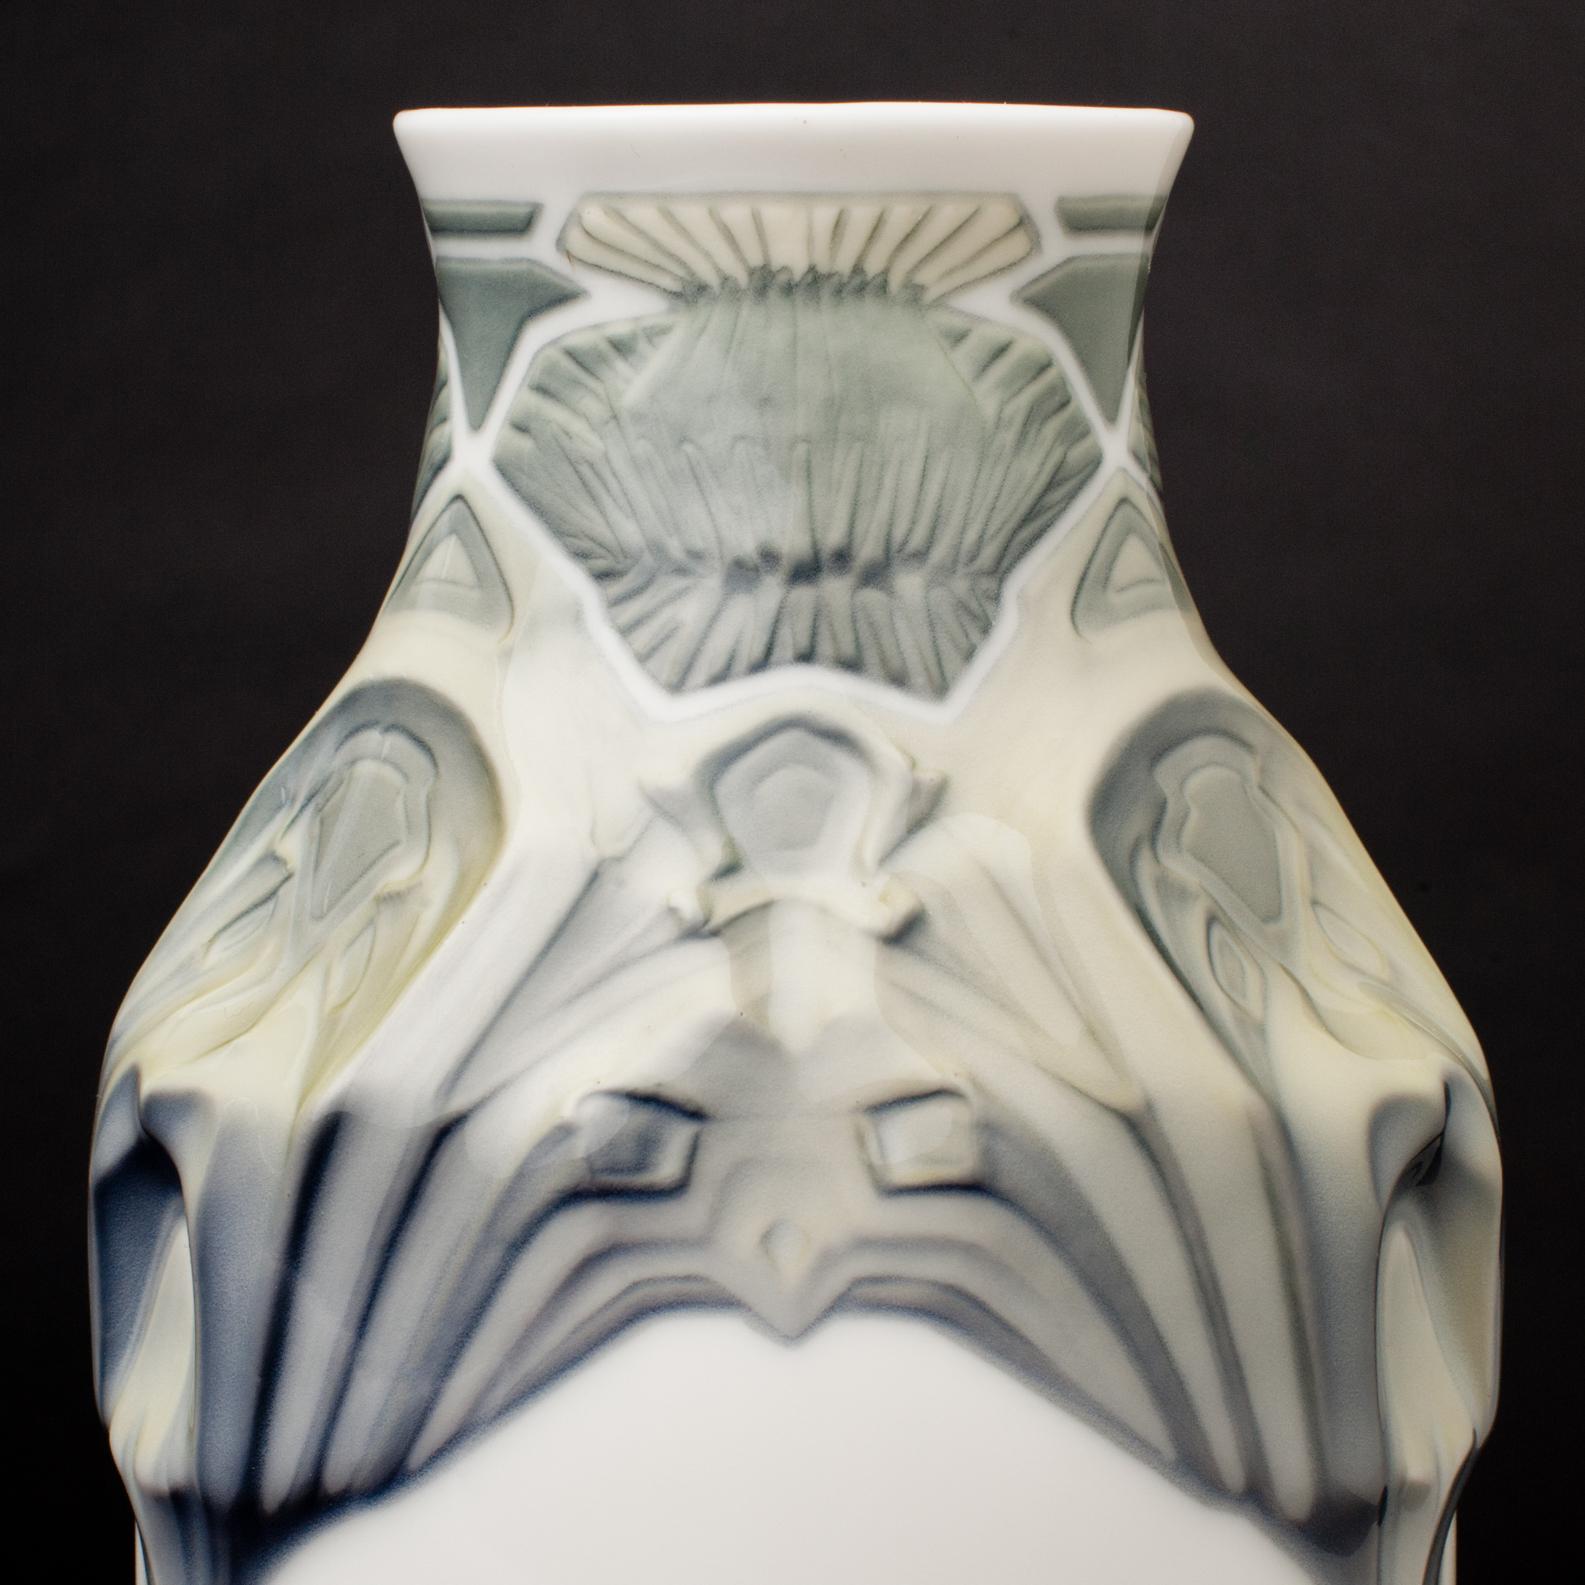 Early 20th Century Jugendstil Geometric Thistle Vase by Theodor Schmutz-Baudiss for Konigliche For Sale